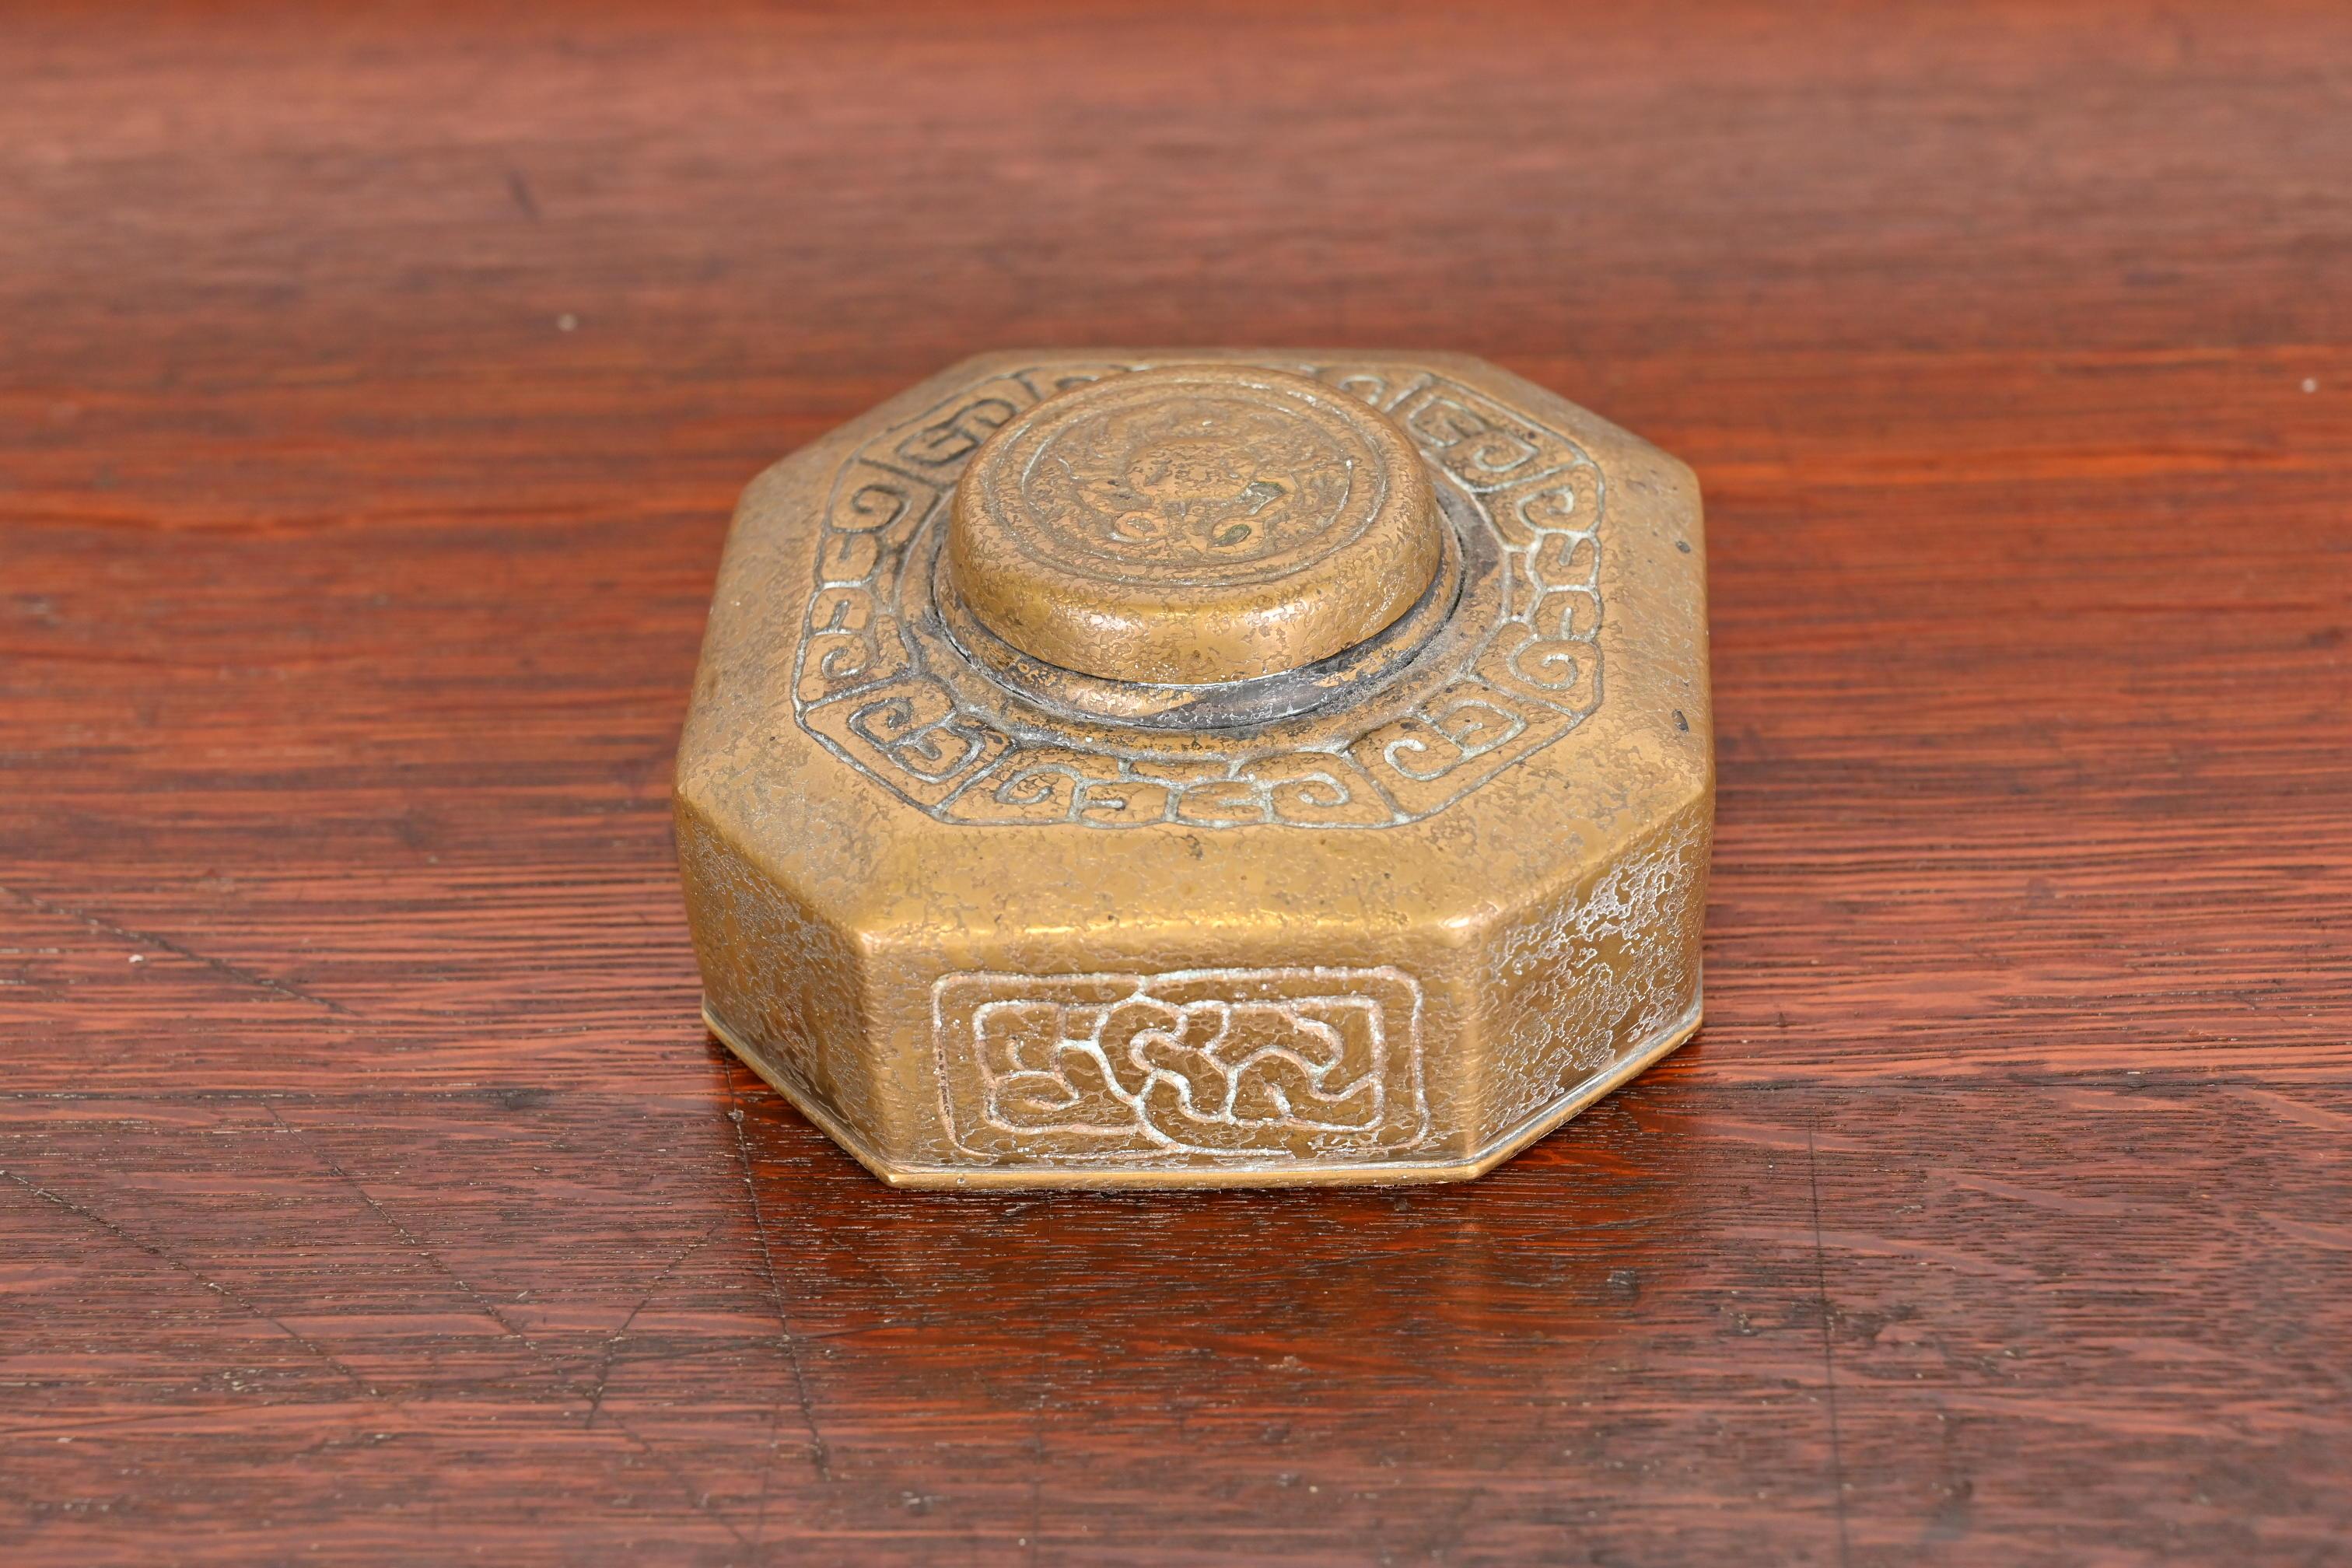 A gorgeous antique gilt bronze inkwell featuring Zodiac designs

By Tiffany Studios (signed to the underside)

New York, USA, Early 20th Century

Measures: 4